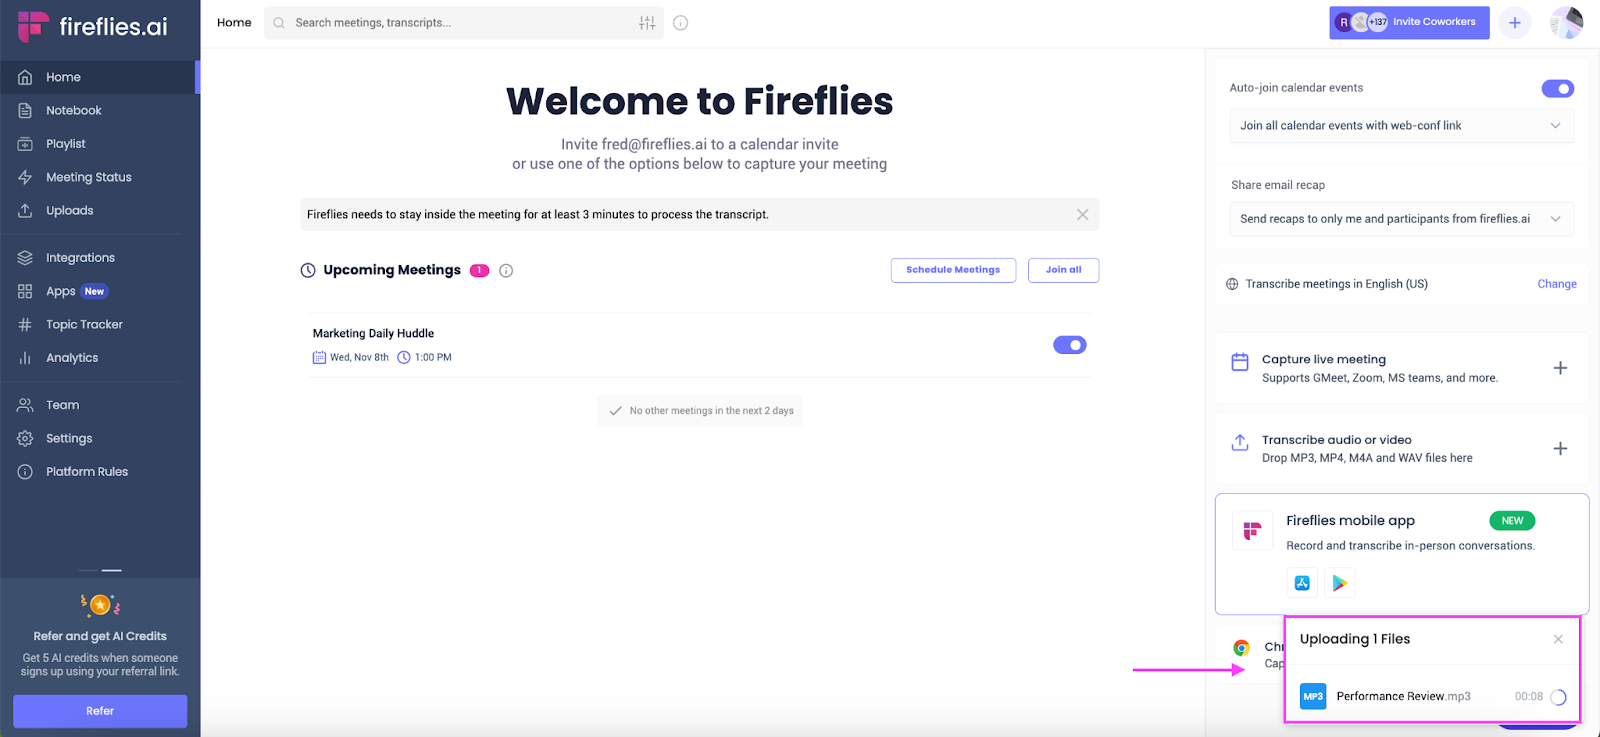 Add transcript to YouTube video - Upload audio or video file to Fireflies